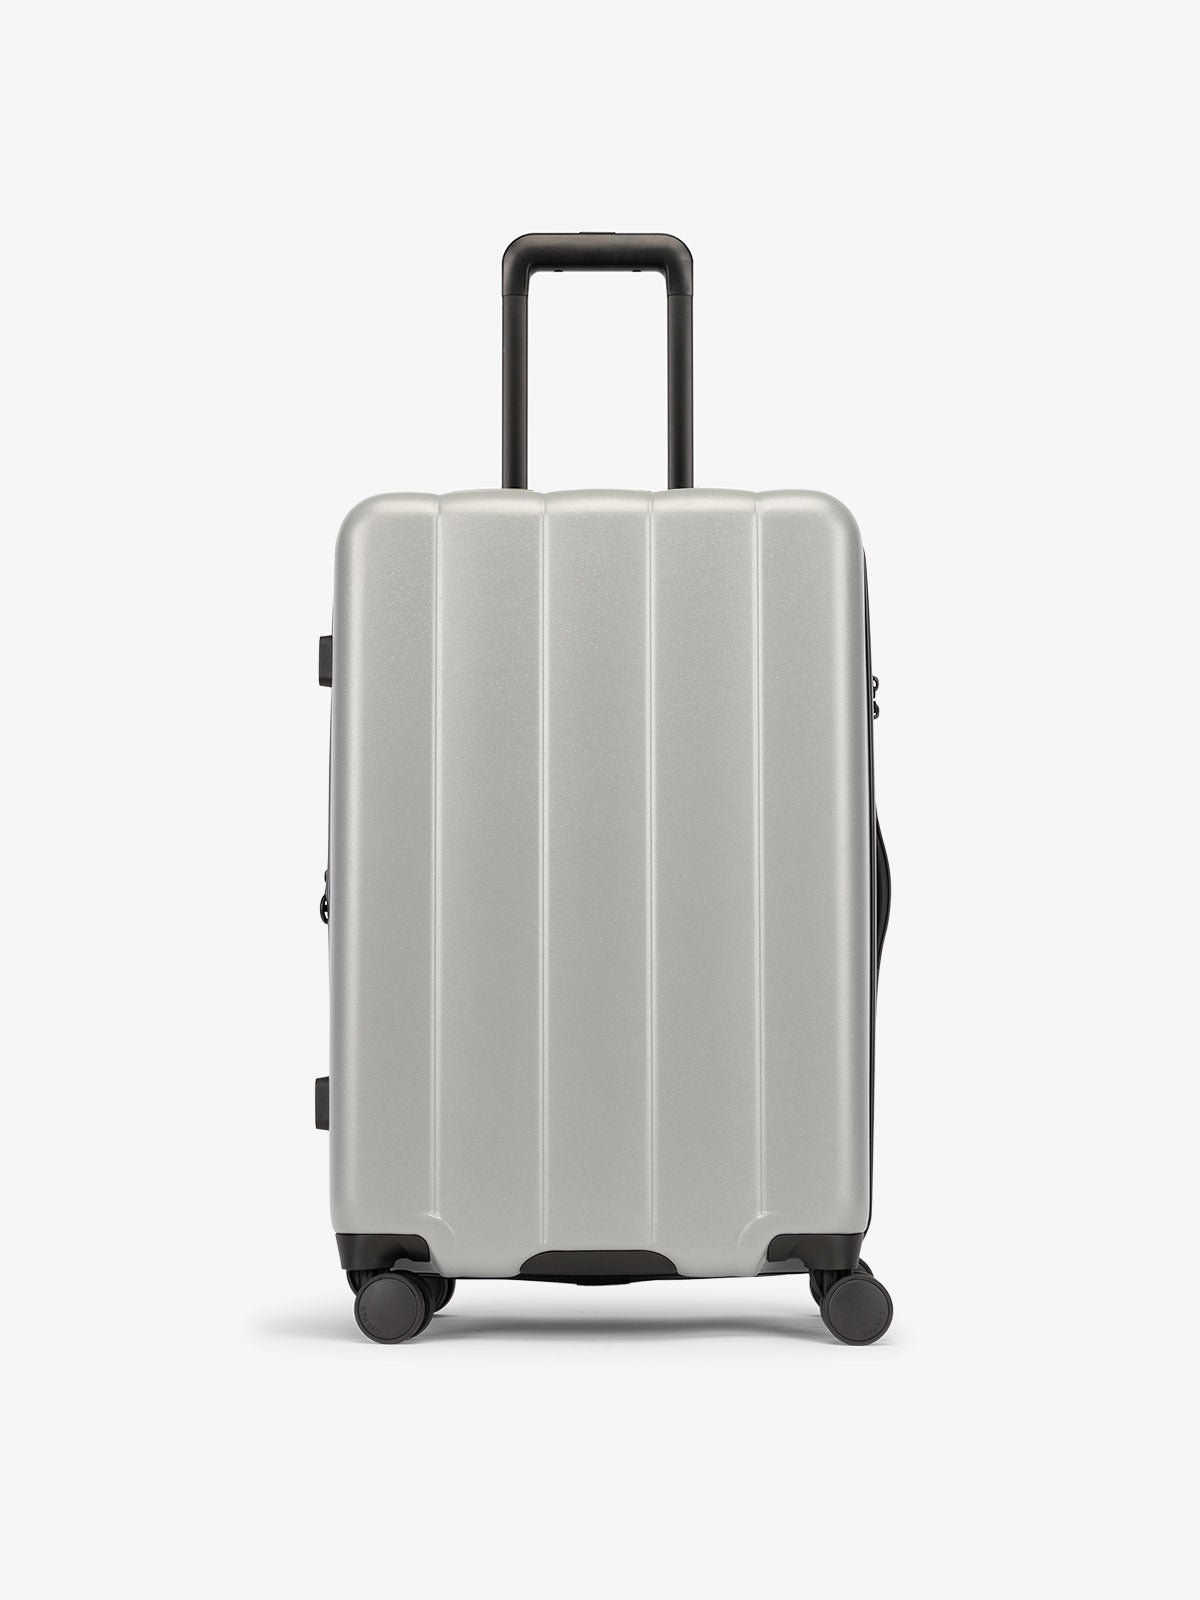 Smoke gray medium luggage made from an ultra-durable polycarbonate shell and expandable by up to 2"